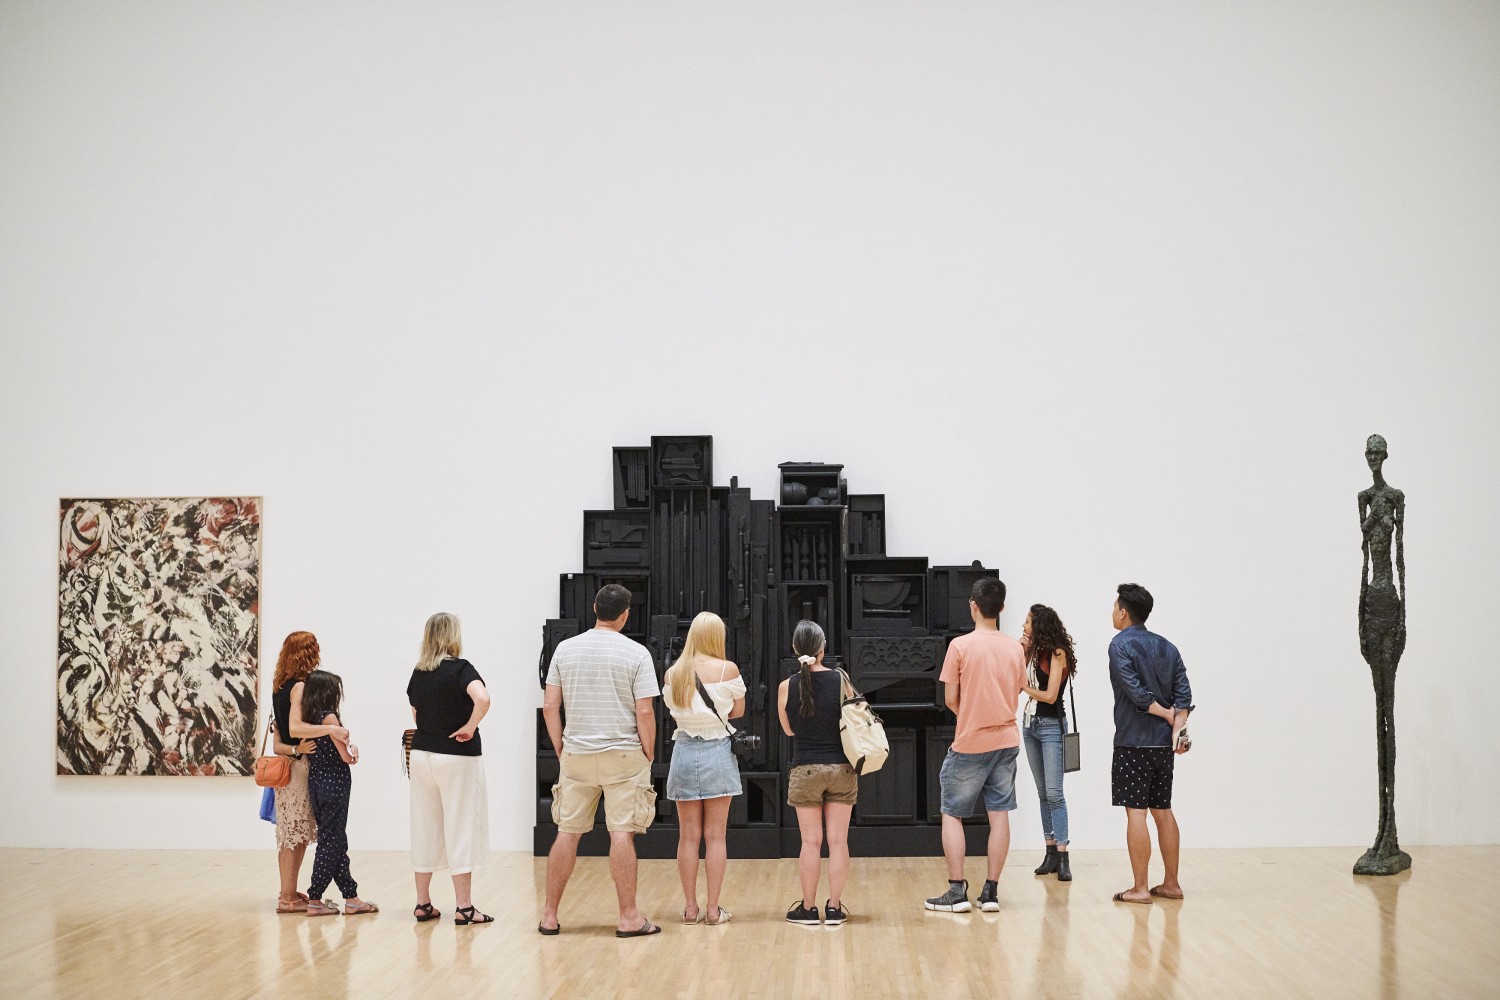 Image courtesy of The Museum of Contemporary Art, Los Angeles, photo by Sean MacGillivray